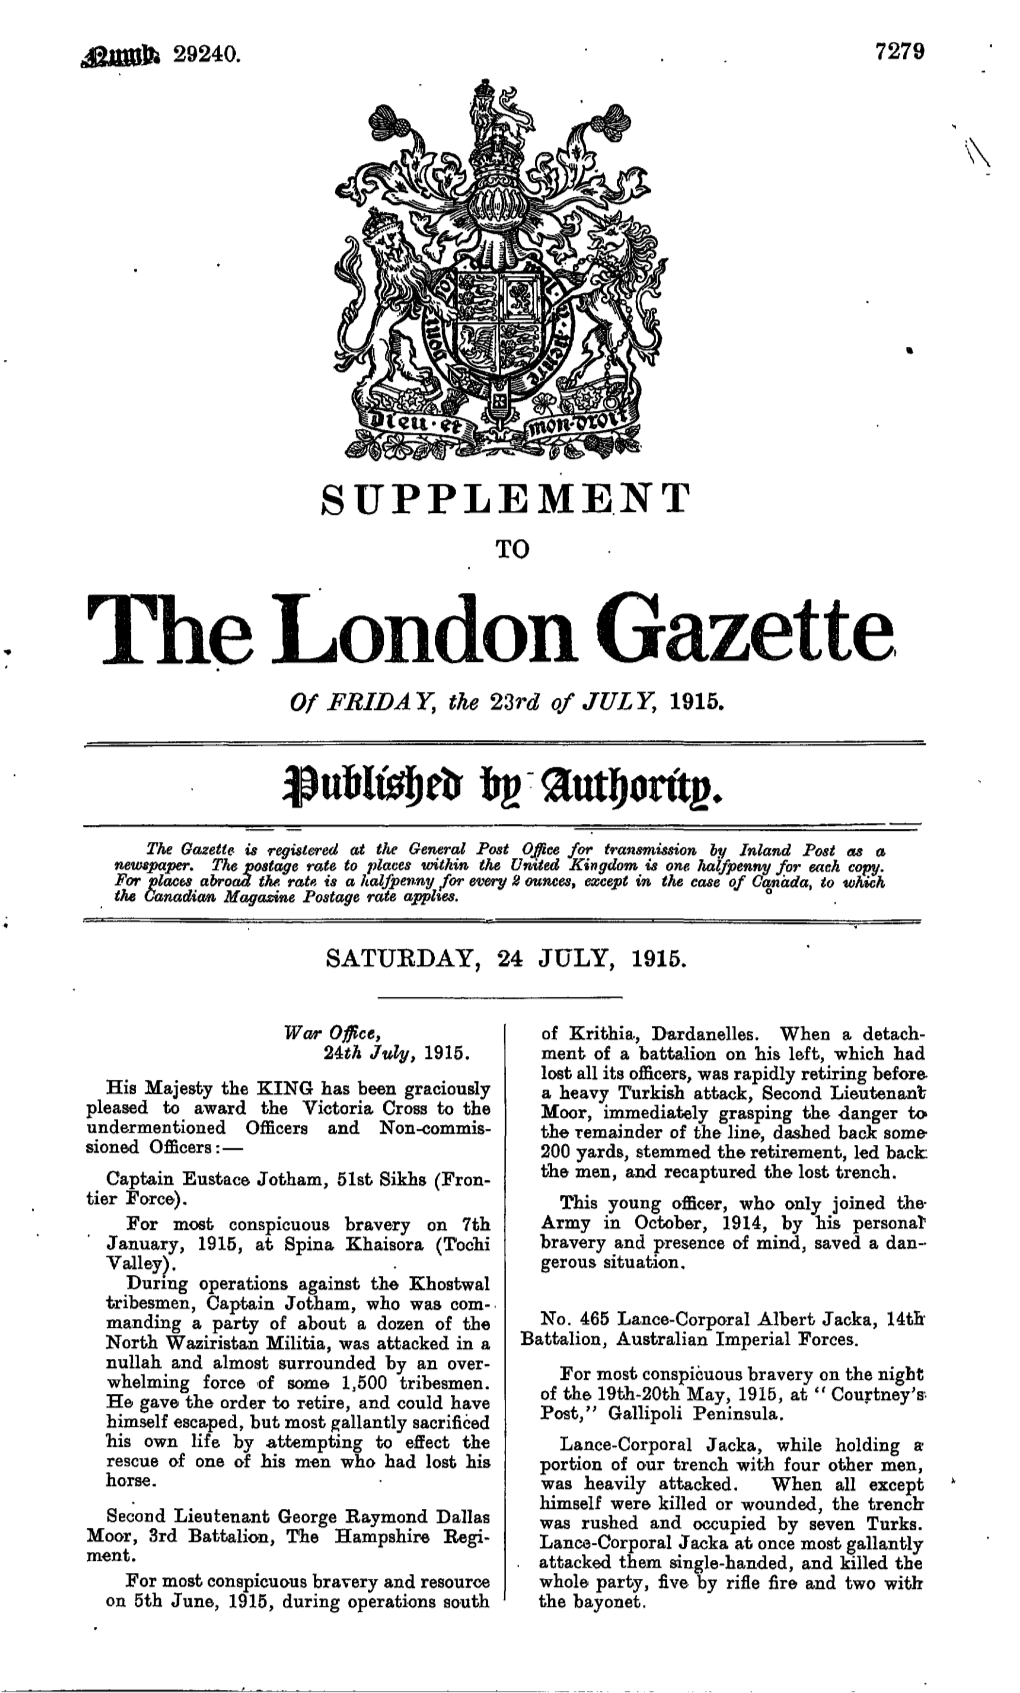 The London Gazette of FRIDAY, the 23Rd of JULY, 1915